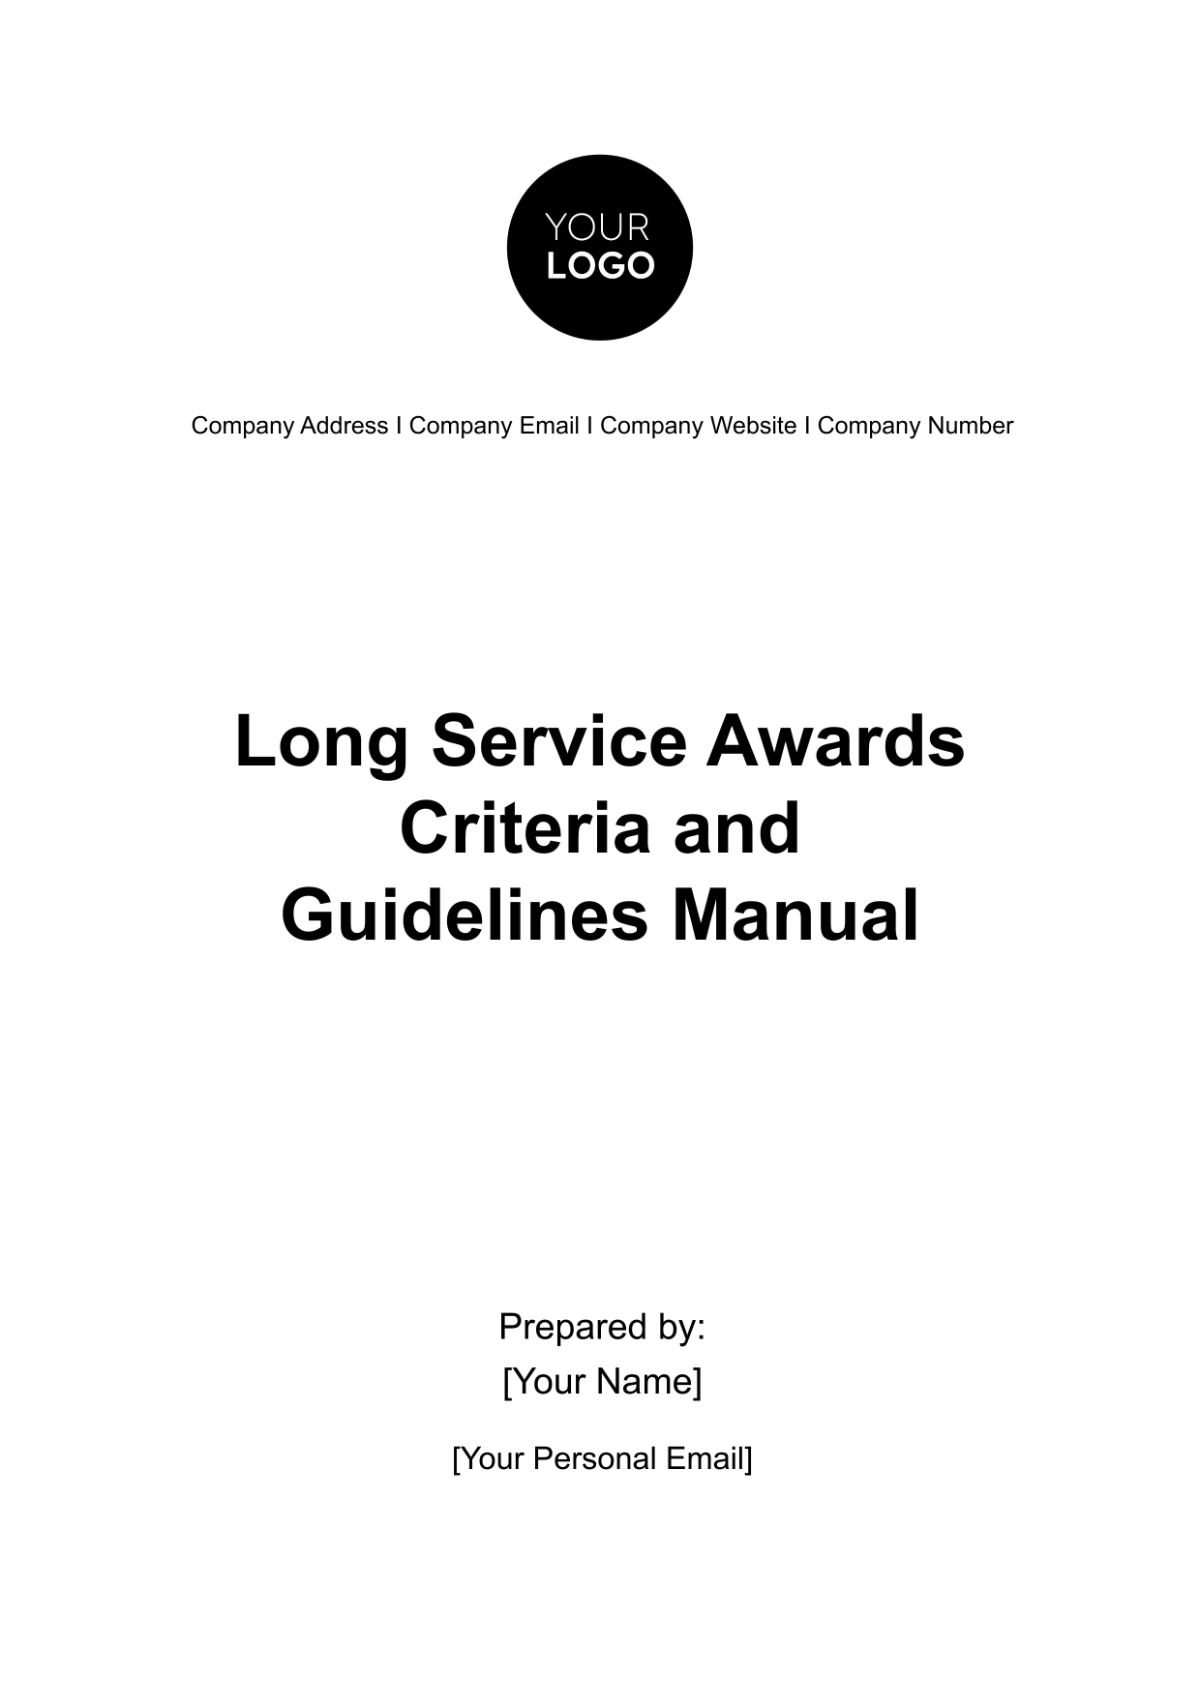 Free Long Service Awards Criteria and Guidelines Manual HR Template